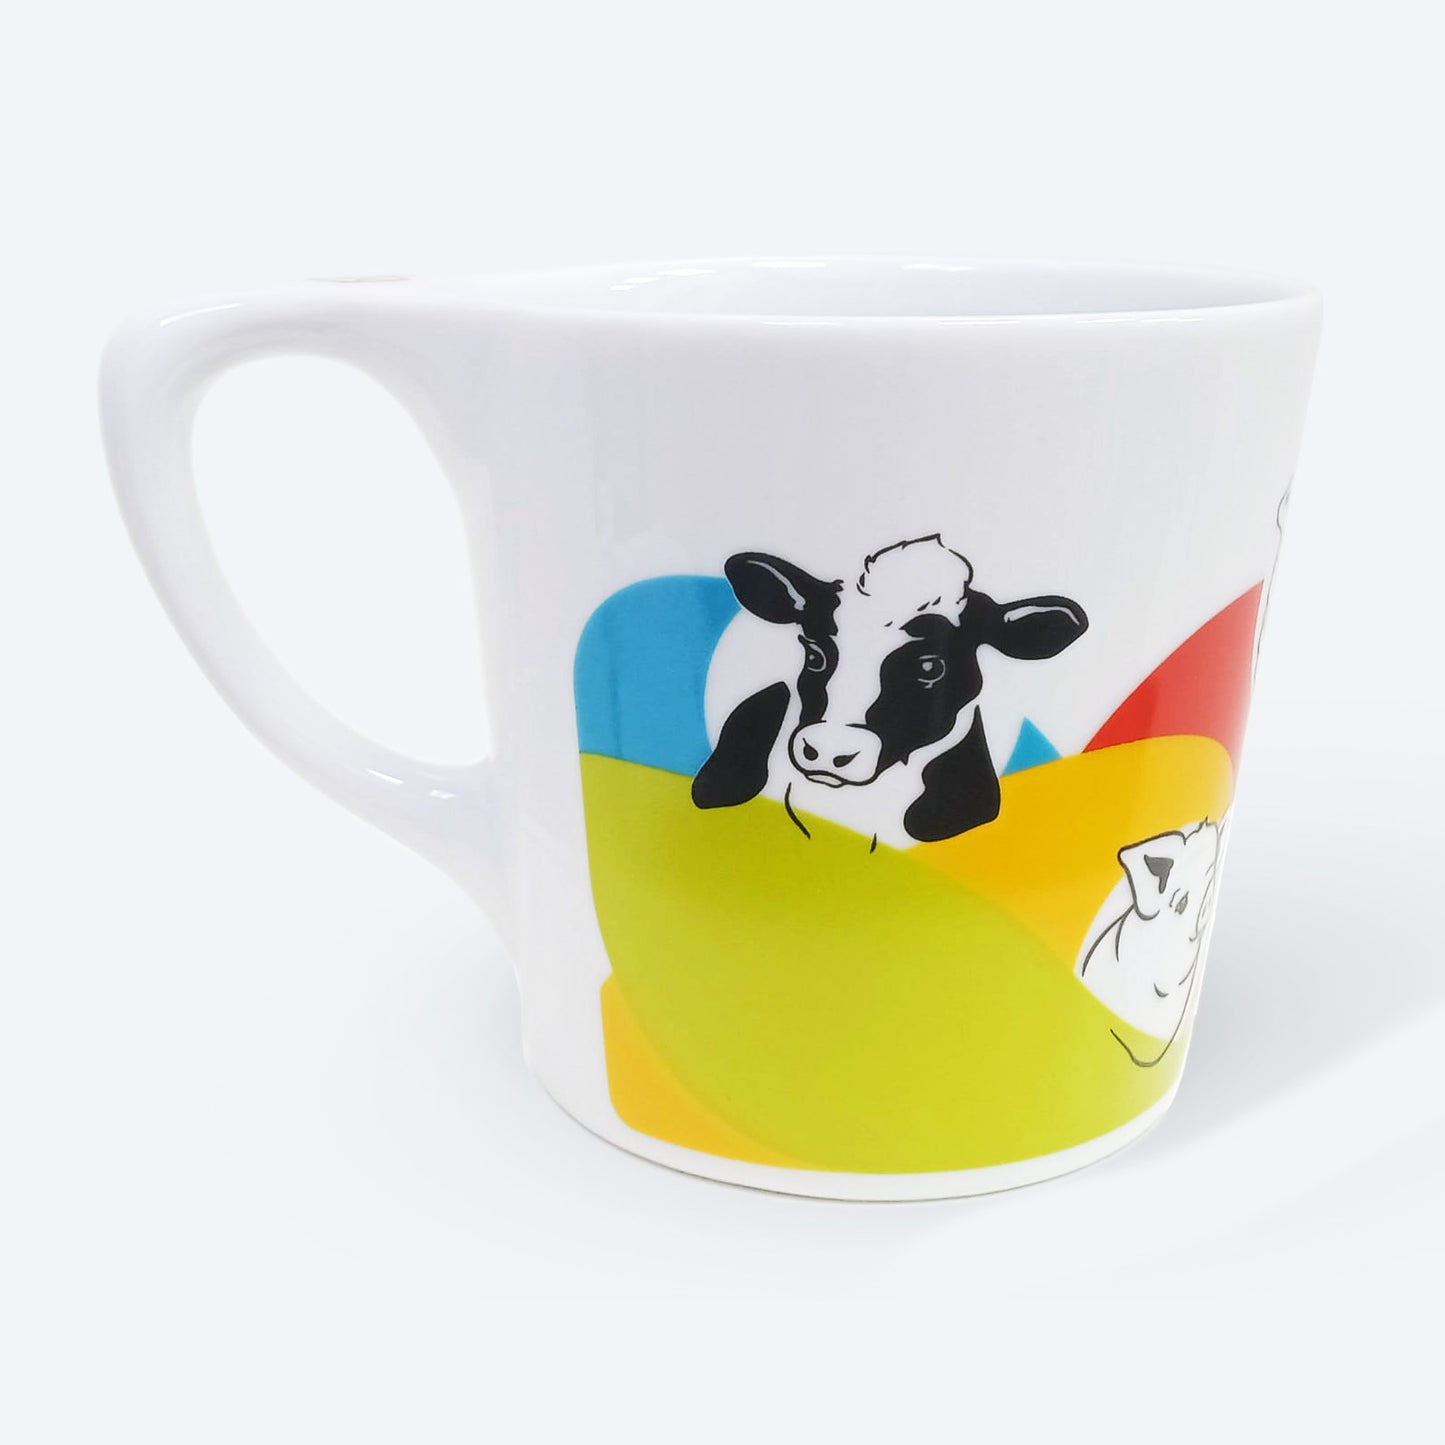 White ceramic mug with handle facing the left and a cow illustration in black facing front. A pig illustration is partly visible on the right side of the mug. There are brightly colored bands flowing under the animal heads like waves. All of the animal illustrations on the mug are in black and of the animals' heads and upper bodies.